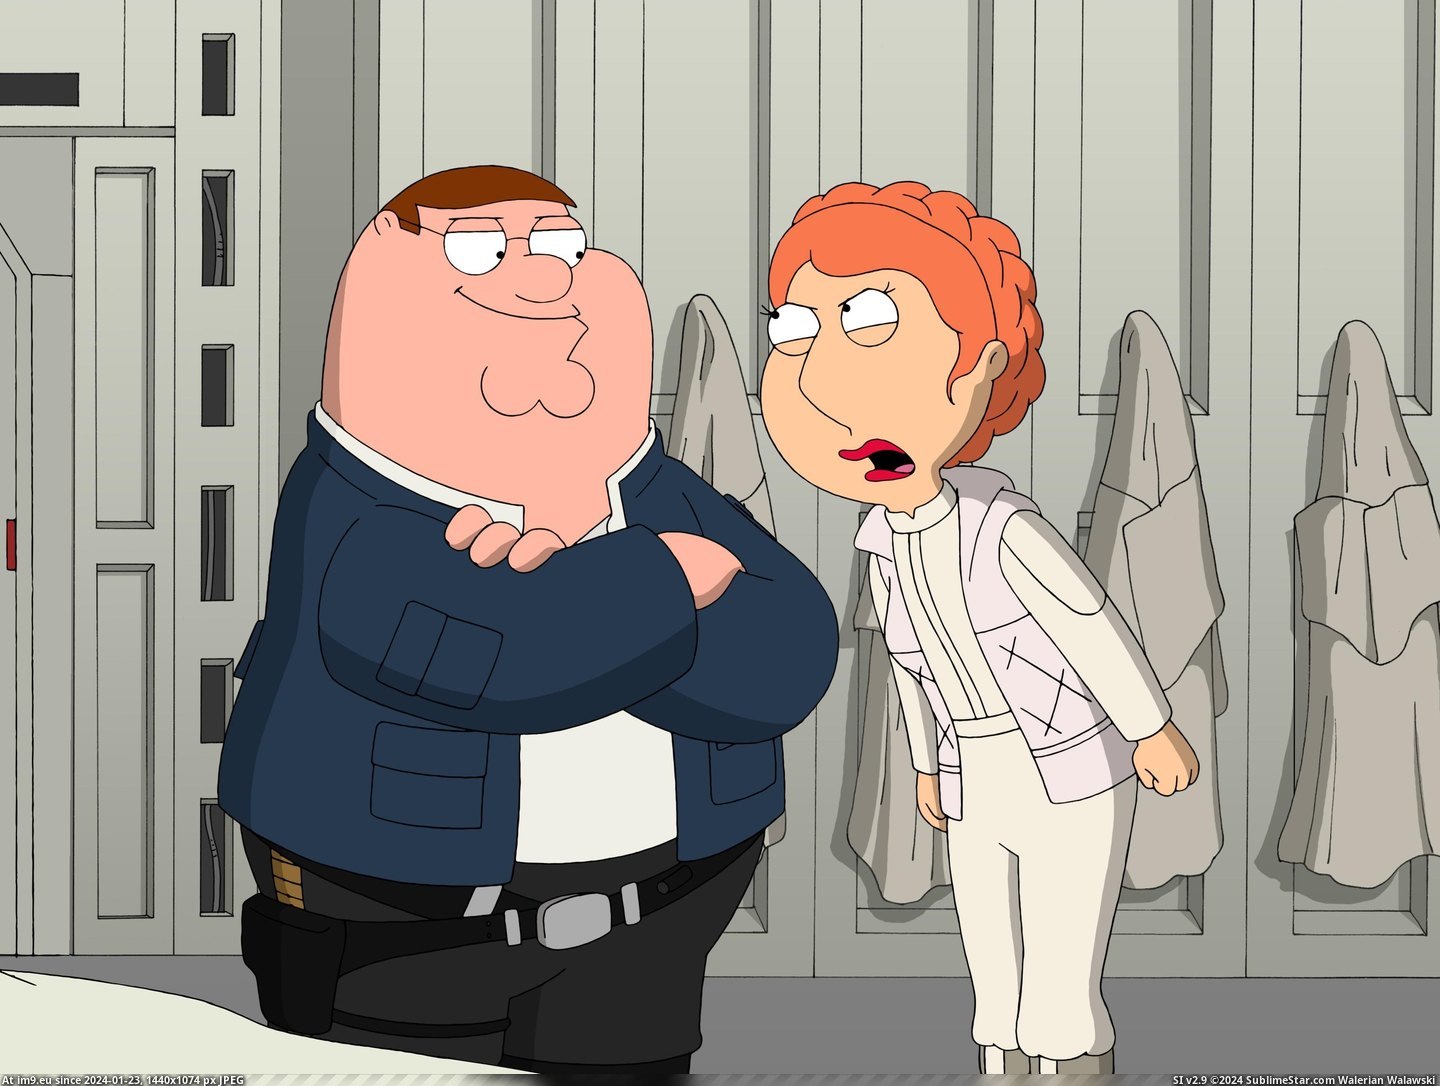 #Guy #Cartoon #Family Cartoon Family Guy 178528 Pic. (Image of album TV Shows HD Wallpapers))